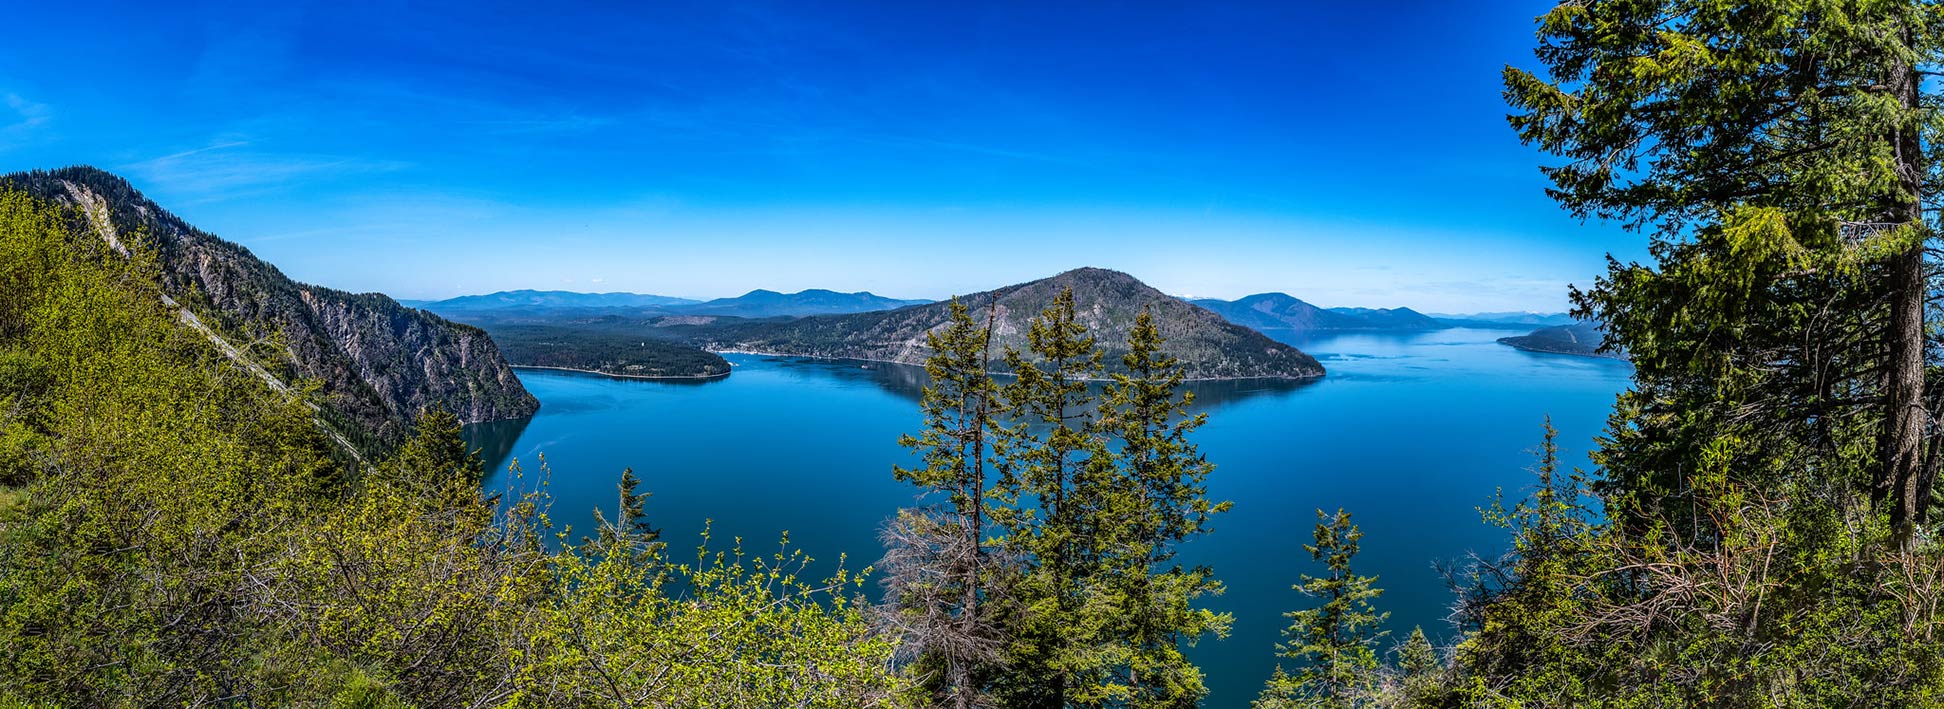 Lake Pend Oreille in Northern Idaho.